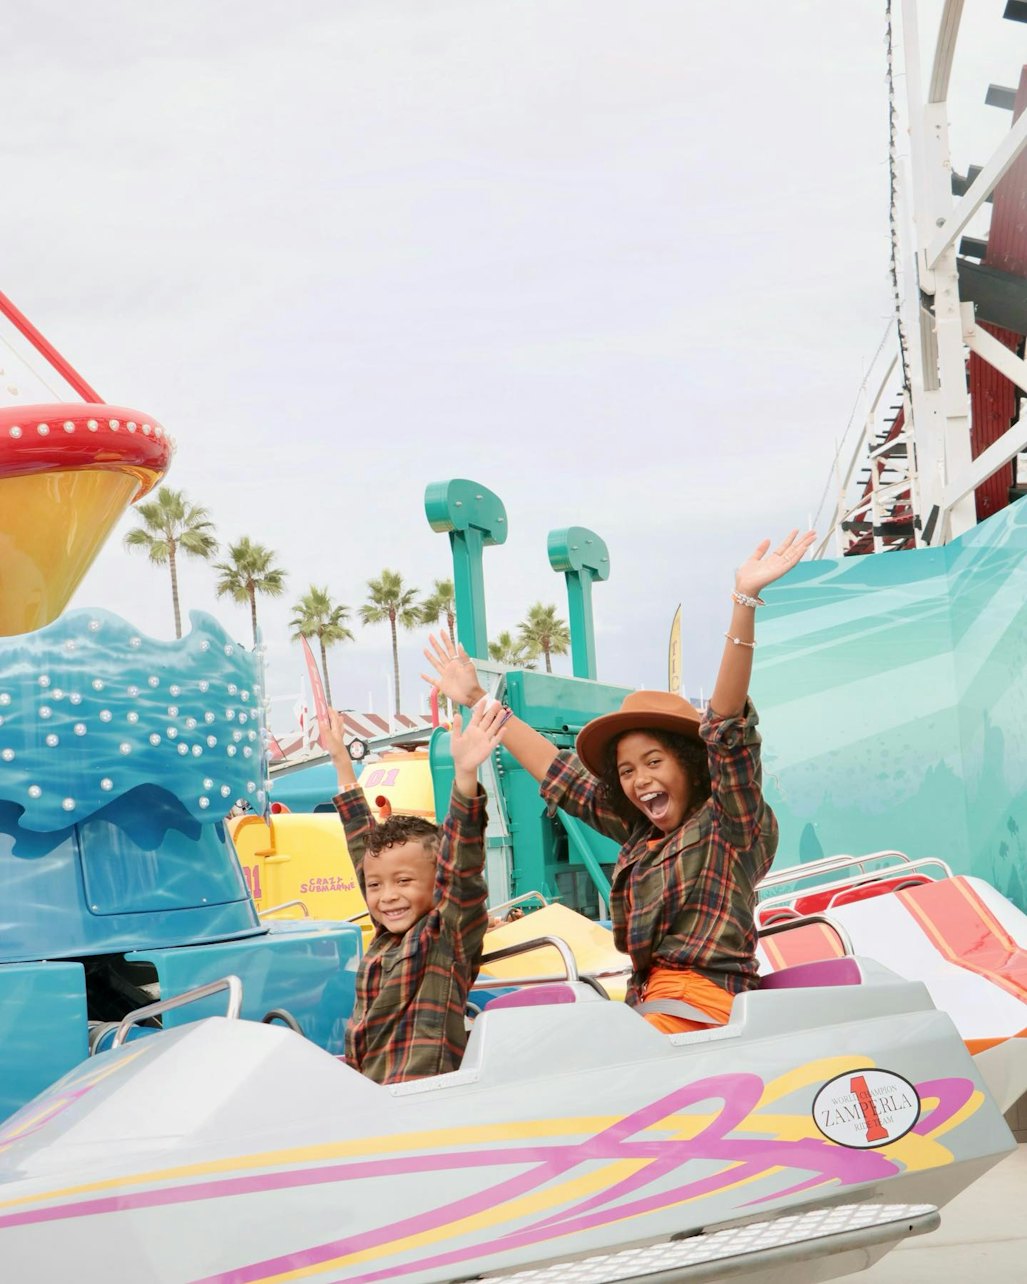 Belmont Park Ride & Play Pass - Accommodations in San Diego